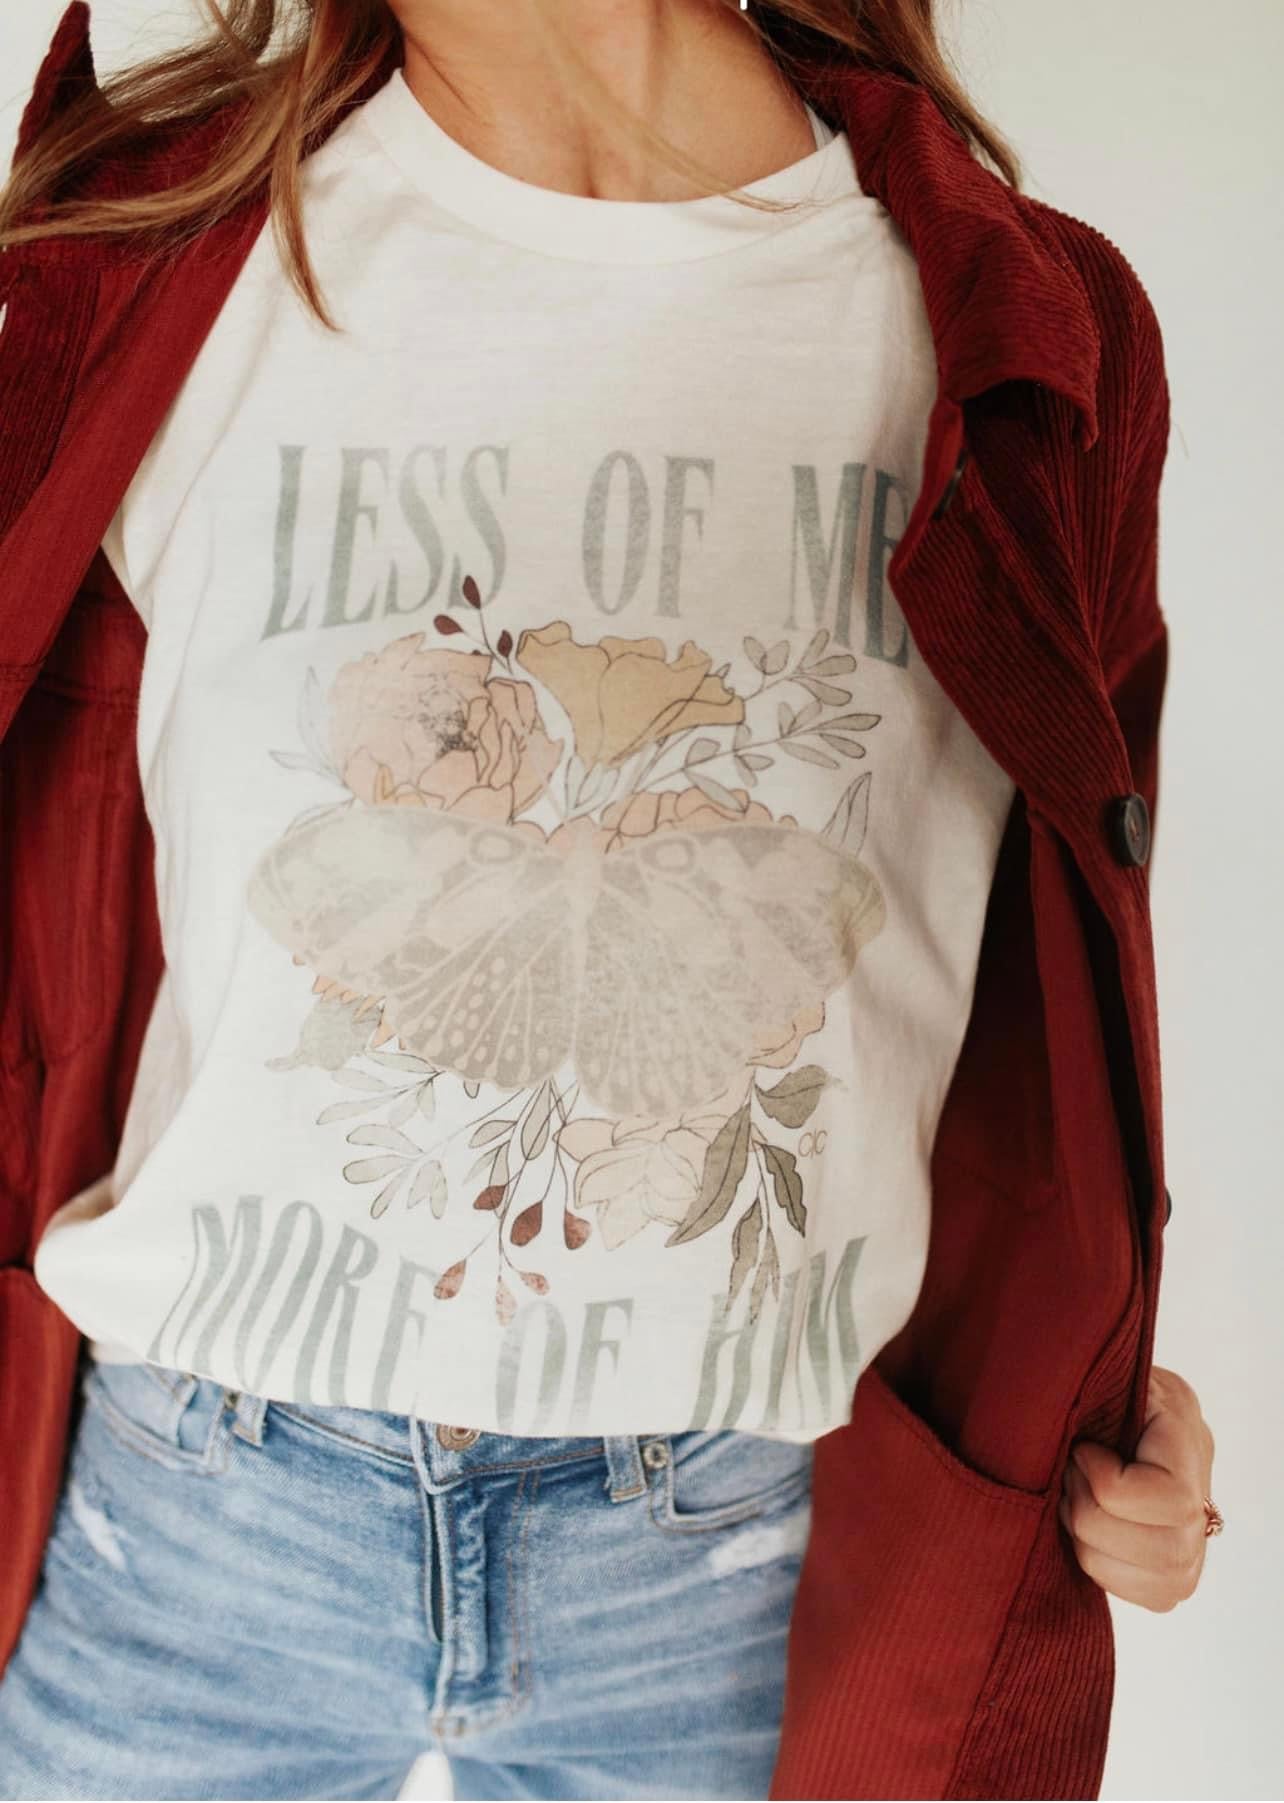 Less of Me Graphic Tee